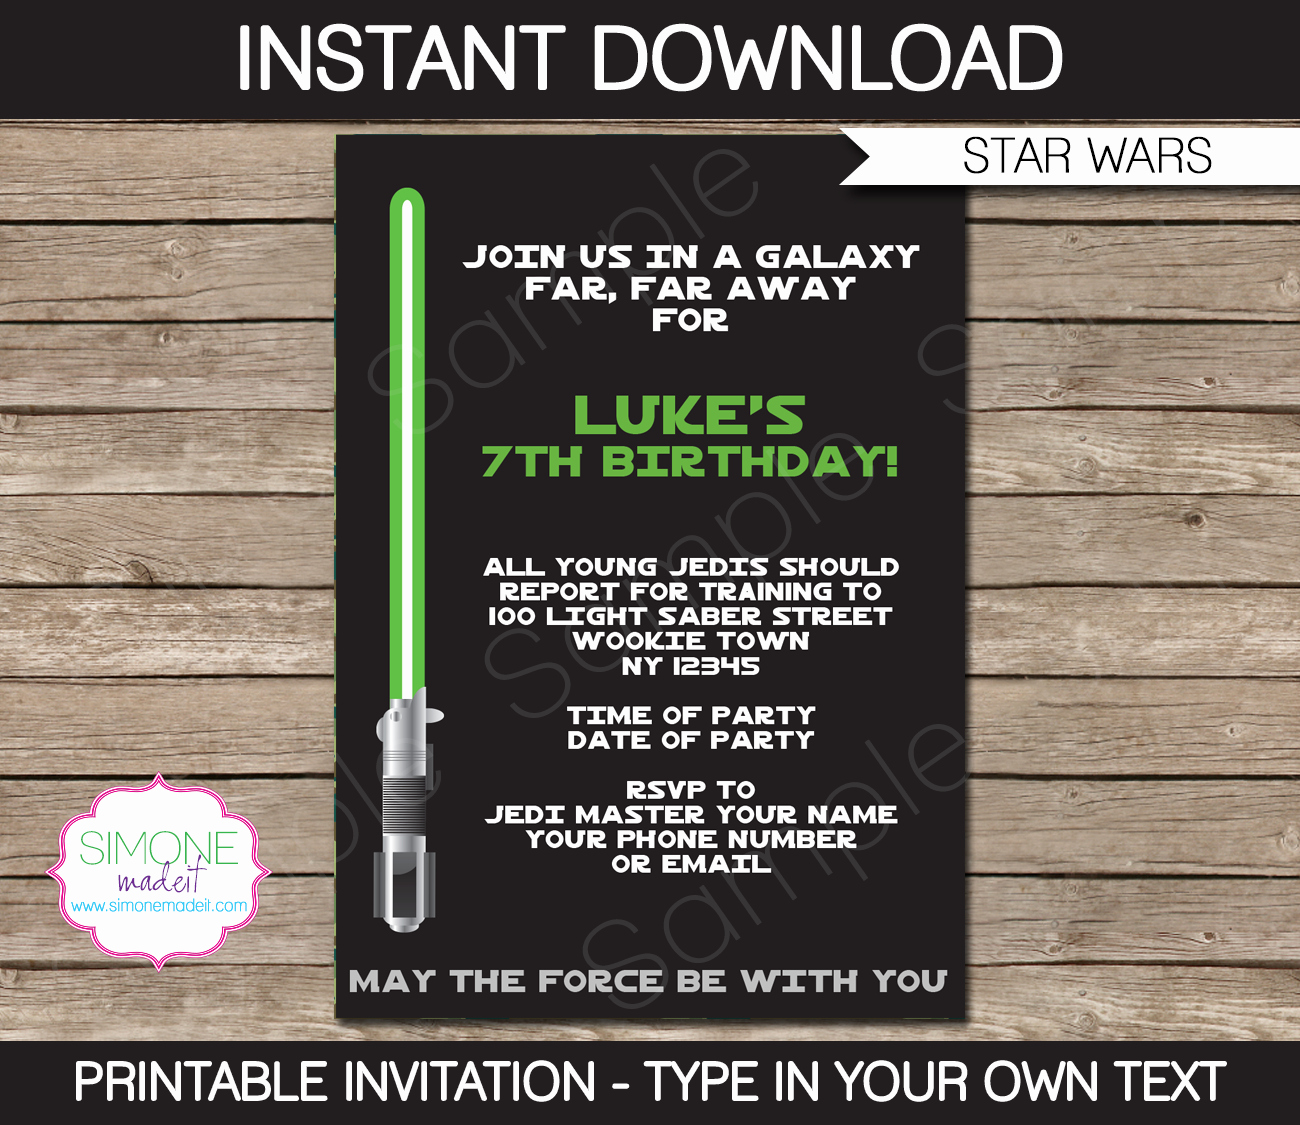 Star Wars Certificate Template Luxury Star Wars Party Printables Invitations &amp; Decorations